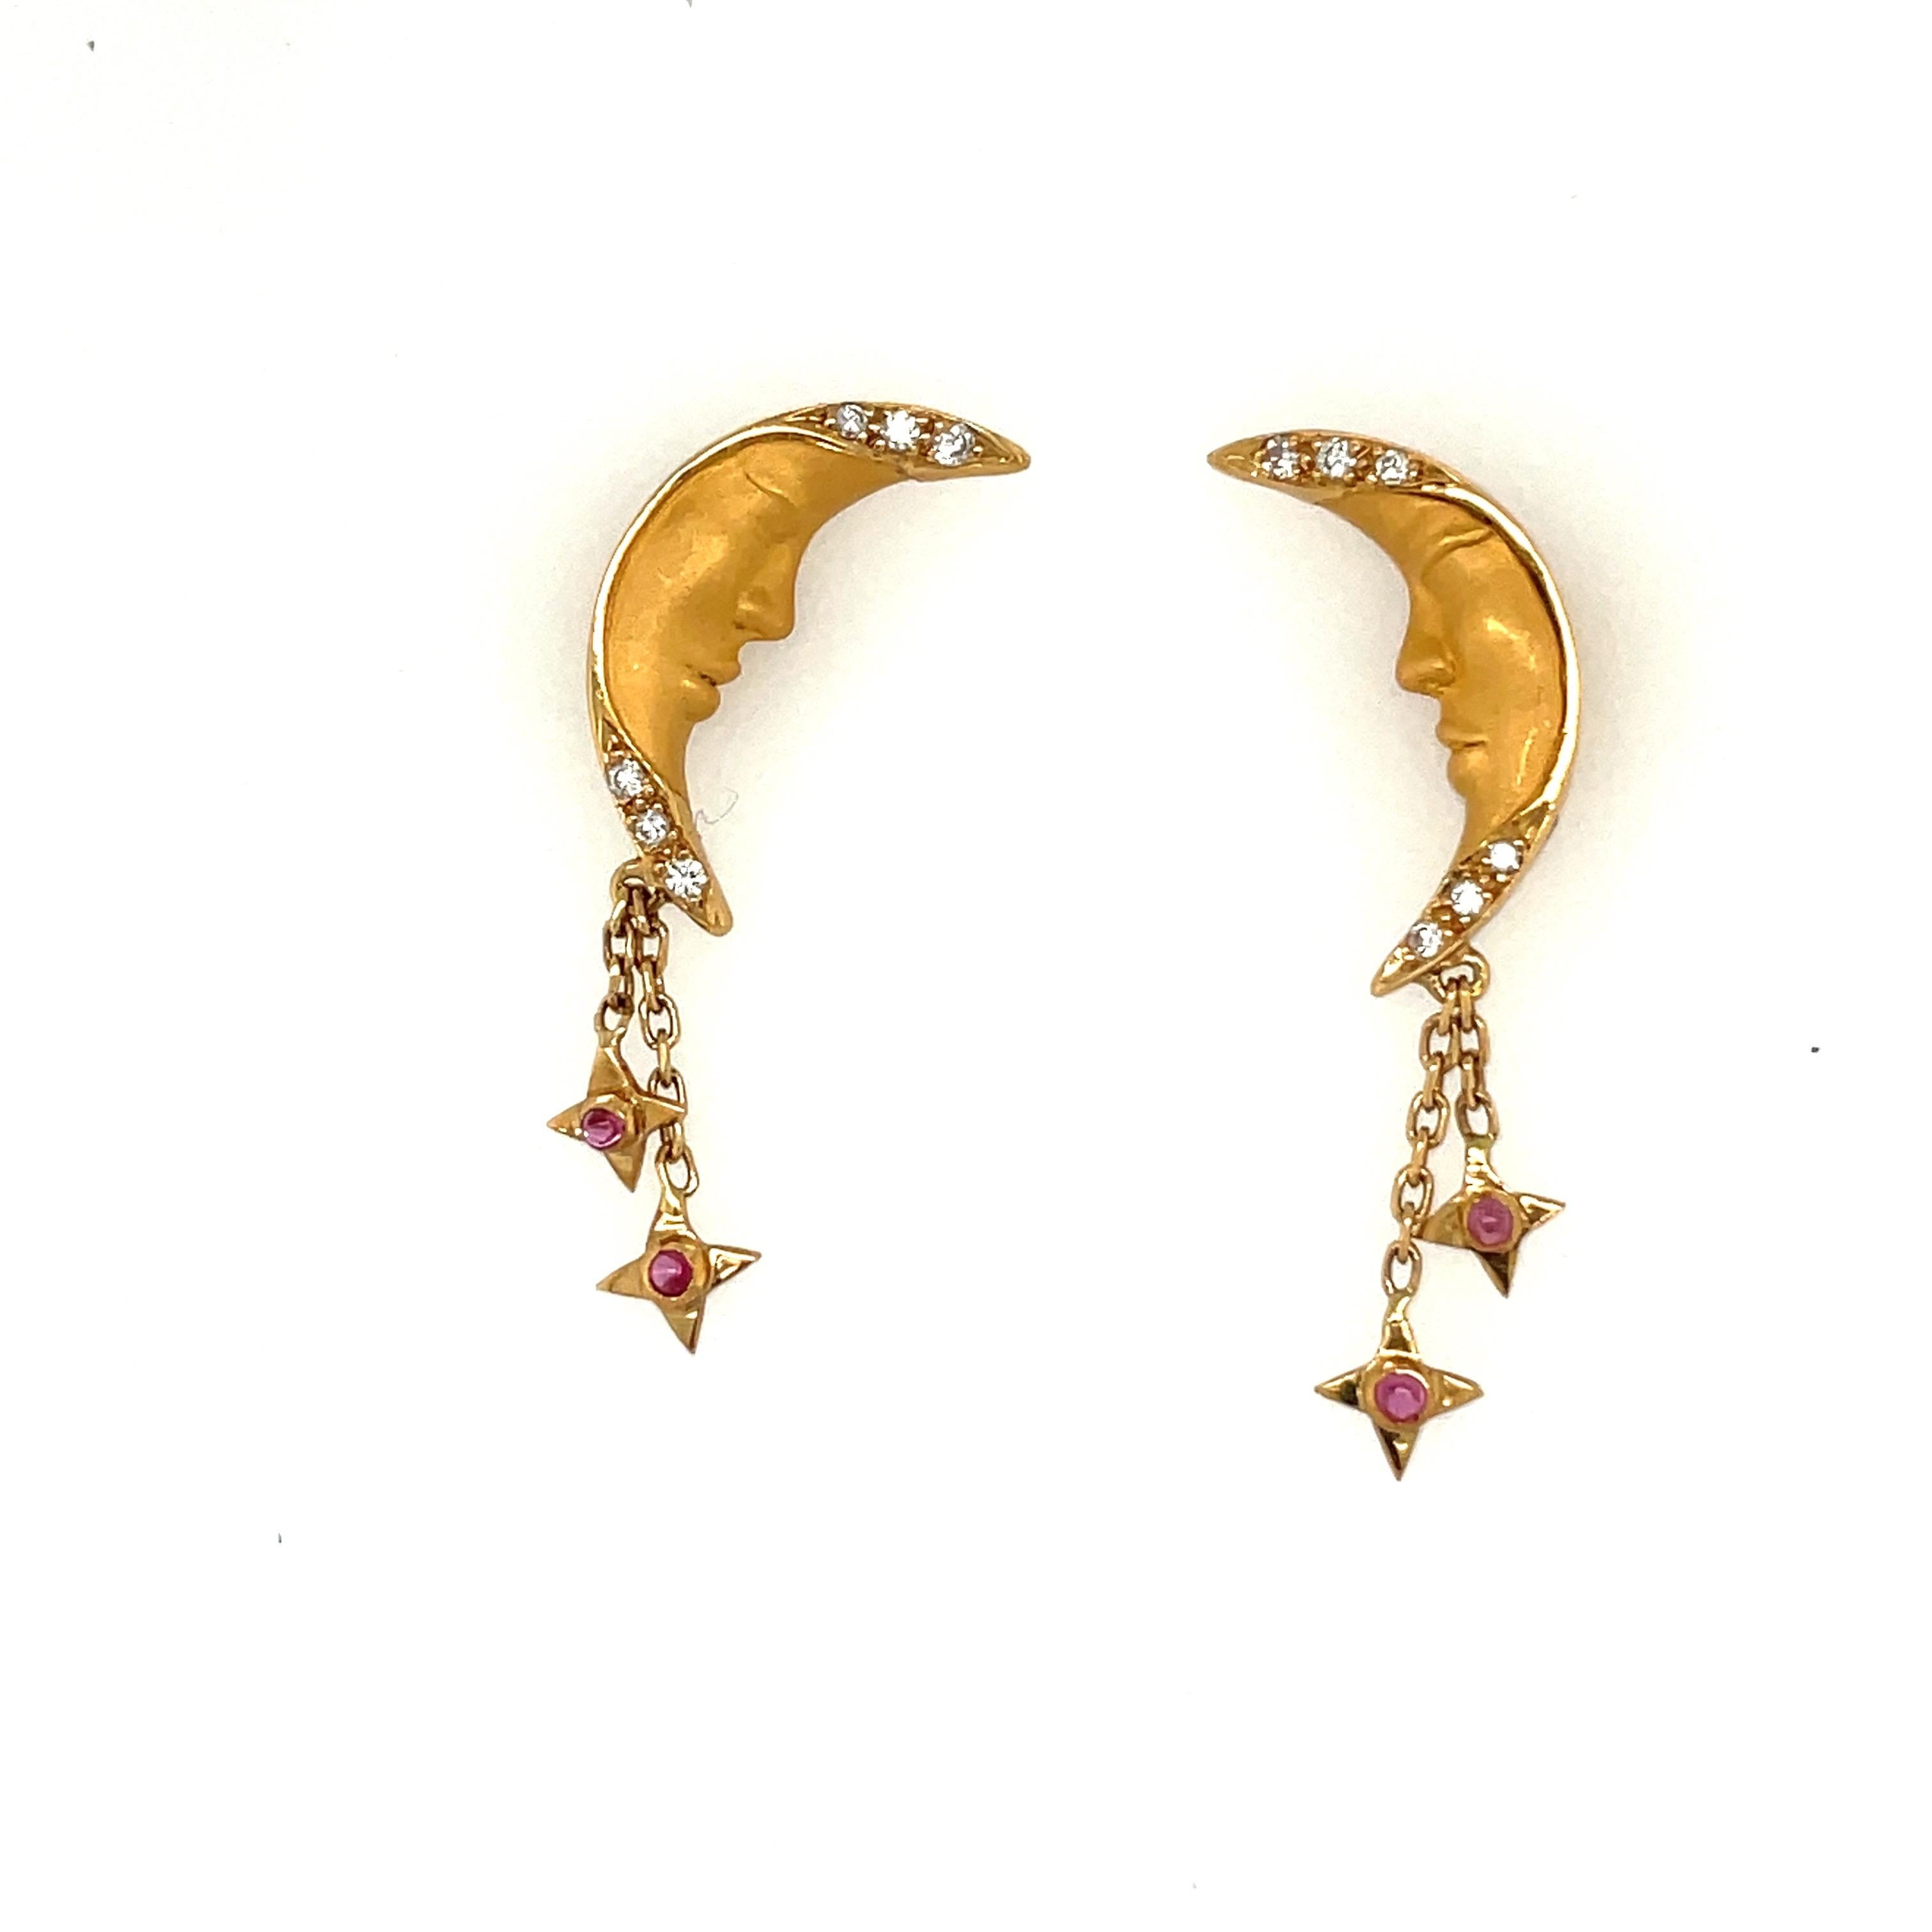 Carrera Y Carrera has built its famous name on figurative designs, an obsession with surface finishes, and a compelling way of seeing beauty in art and nature. 
Beautiful 18KT yellow gold crescent moon pierced earrings. The earrings are designed